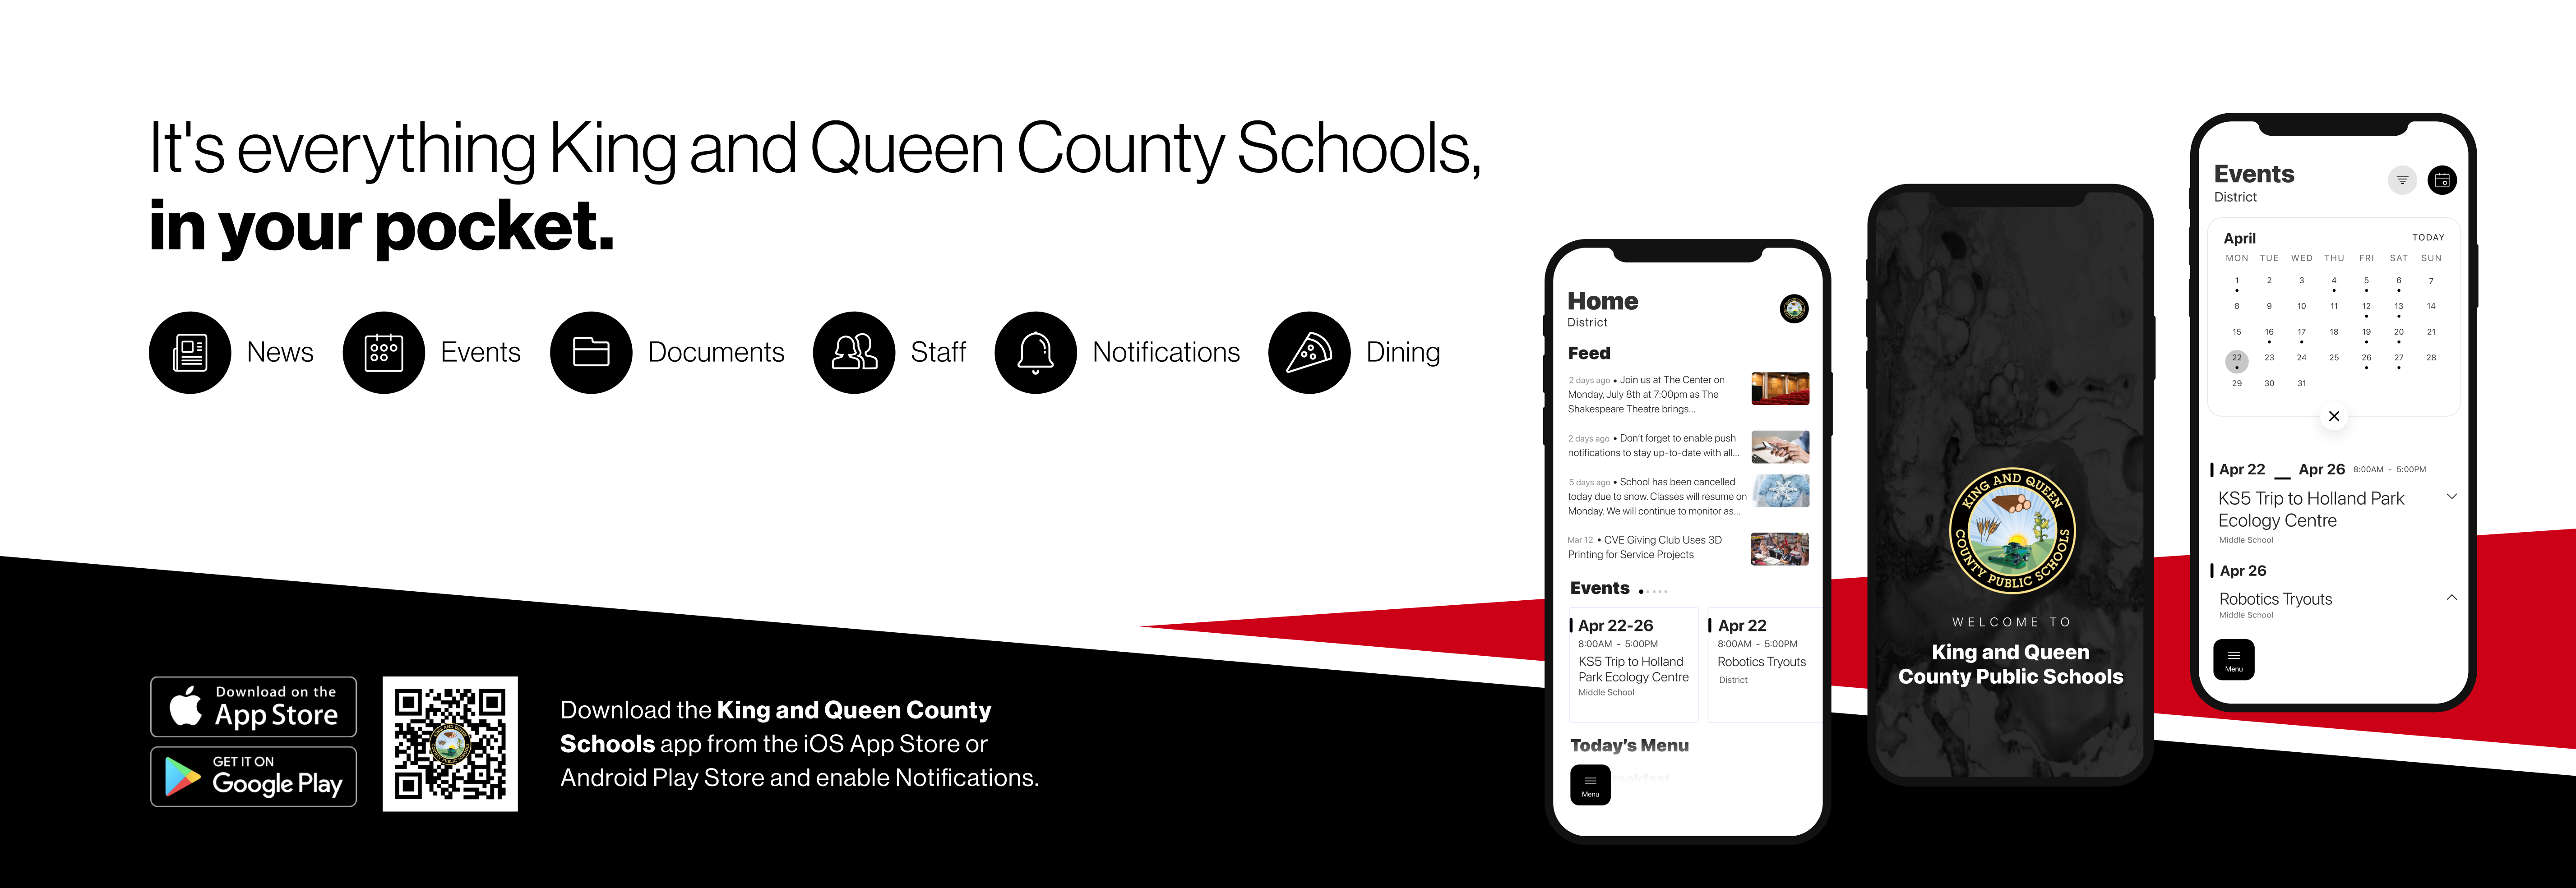 It’s everything King and Queen County Schools, in your pocket.